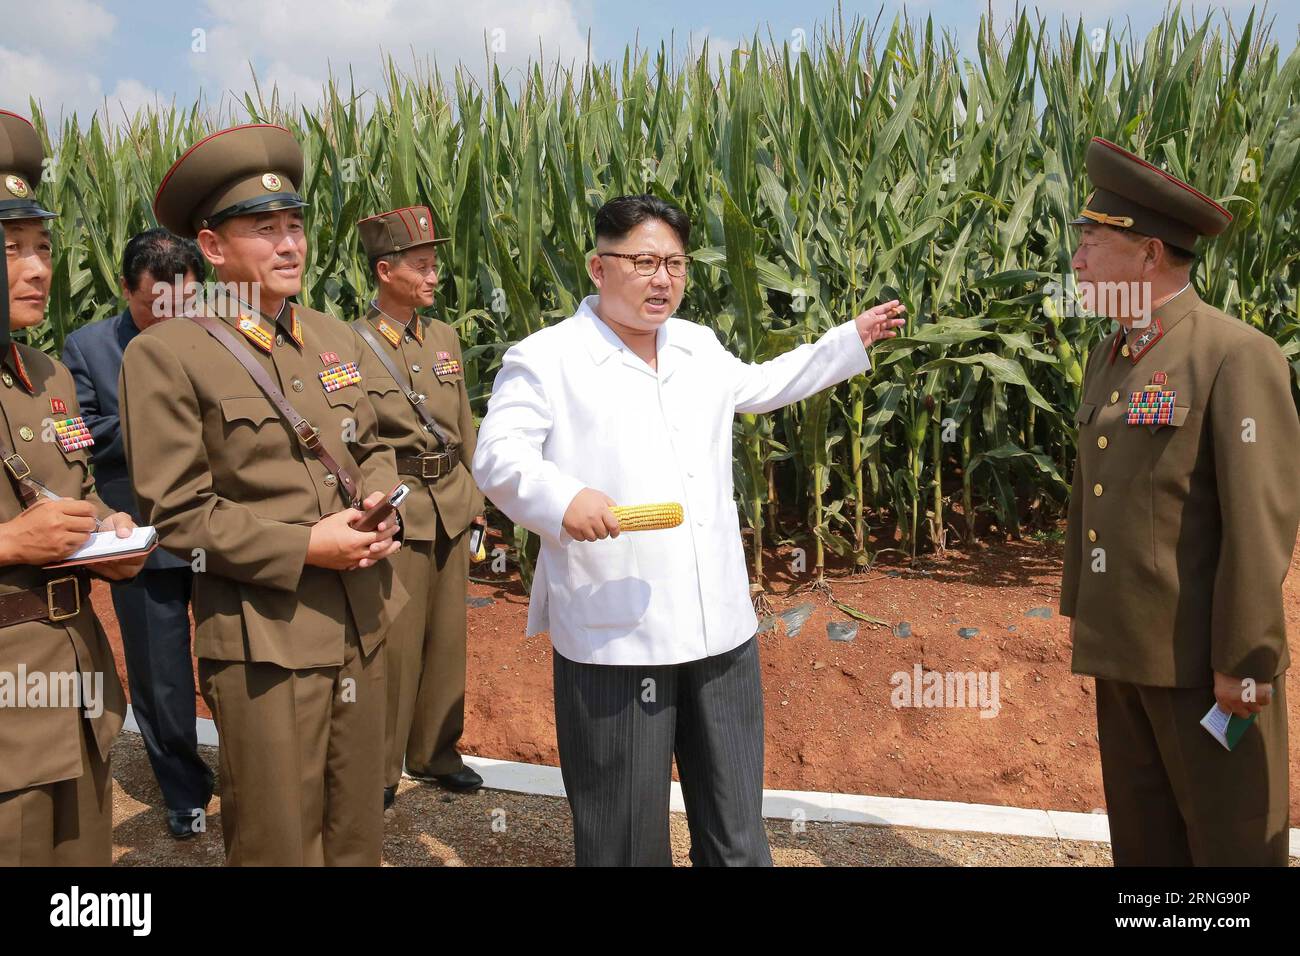 (160913) -- PYONGYANG, Sept. 13, 2016 -- Photo provided by Korean Central News Agency () on Sept. 13, 2016 shows top leader of the Democratic People s Republic of Korea (DPRK) Kim Jong Un (2nd R) recently giving field guidance to Farm No. 1116 under KPA Unit 810 in DPRK. Kim Jong Un went to the trial and cultivation plots, greenhouse and other parts of the farm to learn in detail about its seed production. He gave valuable instructions to the farm and named the new strain of maize Phyongok 9 . )(yk) DPRK-FARM-KIM JONG UN-FIELD GUIDANCE KCNA PUBLICATIONxNOTxINxCHN Stock Photo